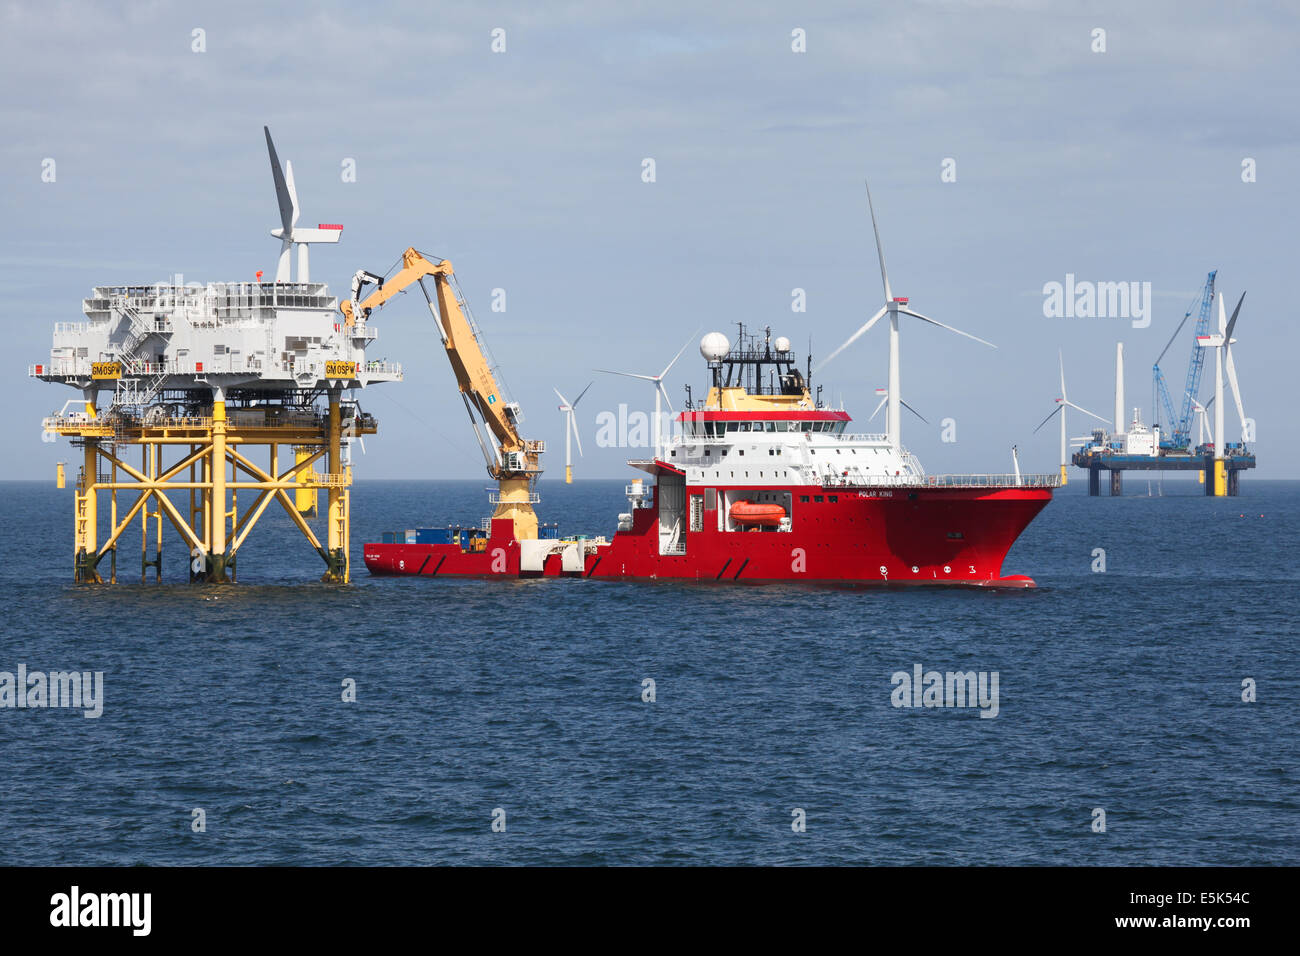 Polar King on the Gwynt y Mor Offshore Wind Farm off the coast of North Wales during the construction phase of spring 2014 Stock Photo